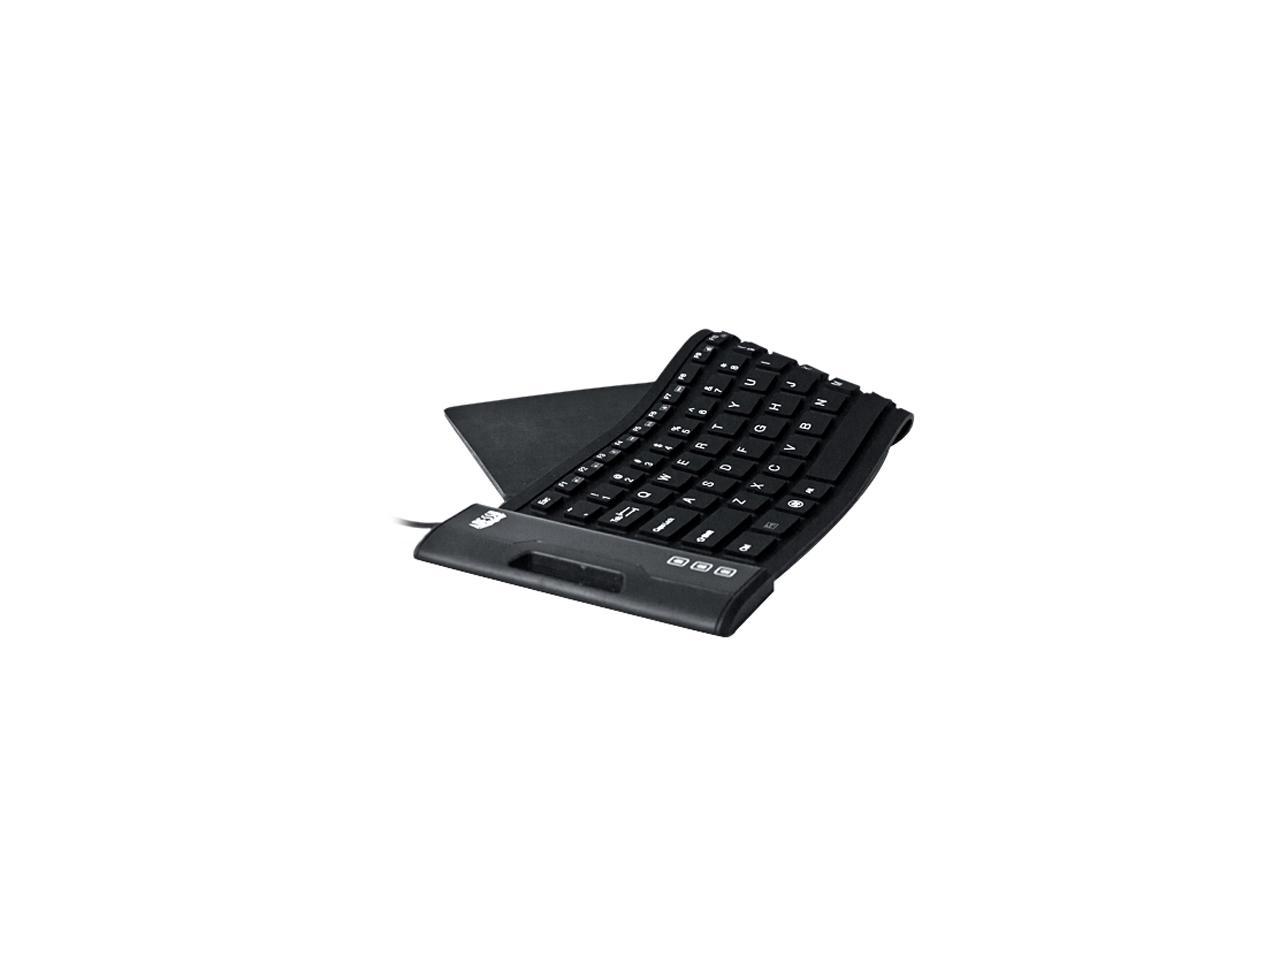 Adesso AKB-222UB USB Antimicrobial Foldable water proof 108-key compact size keyboard, 0.43" x 15.00" x 4.82" (Black)